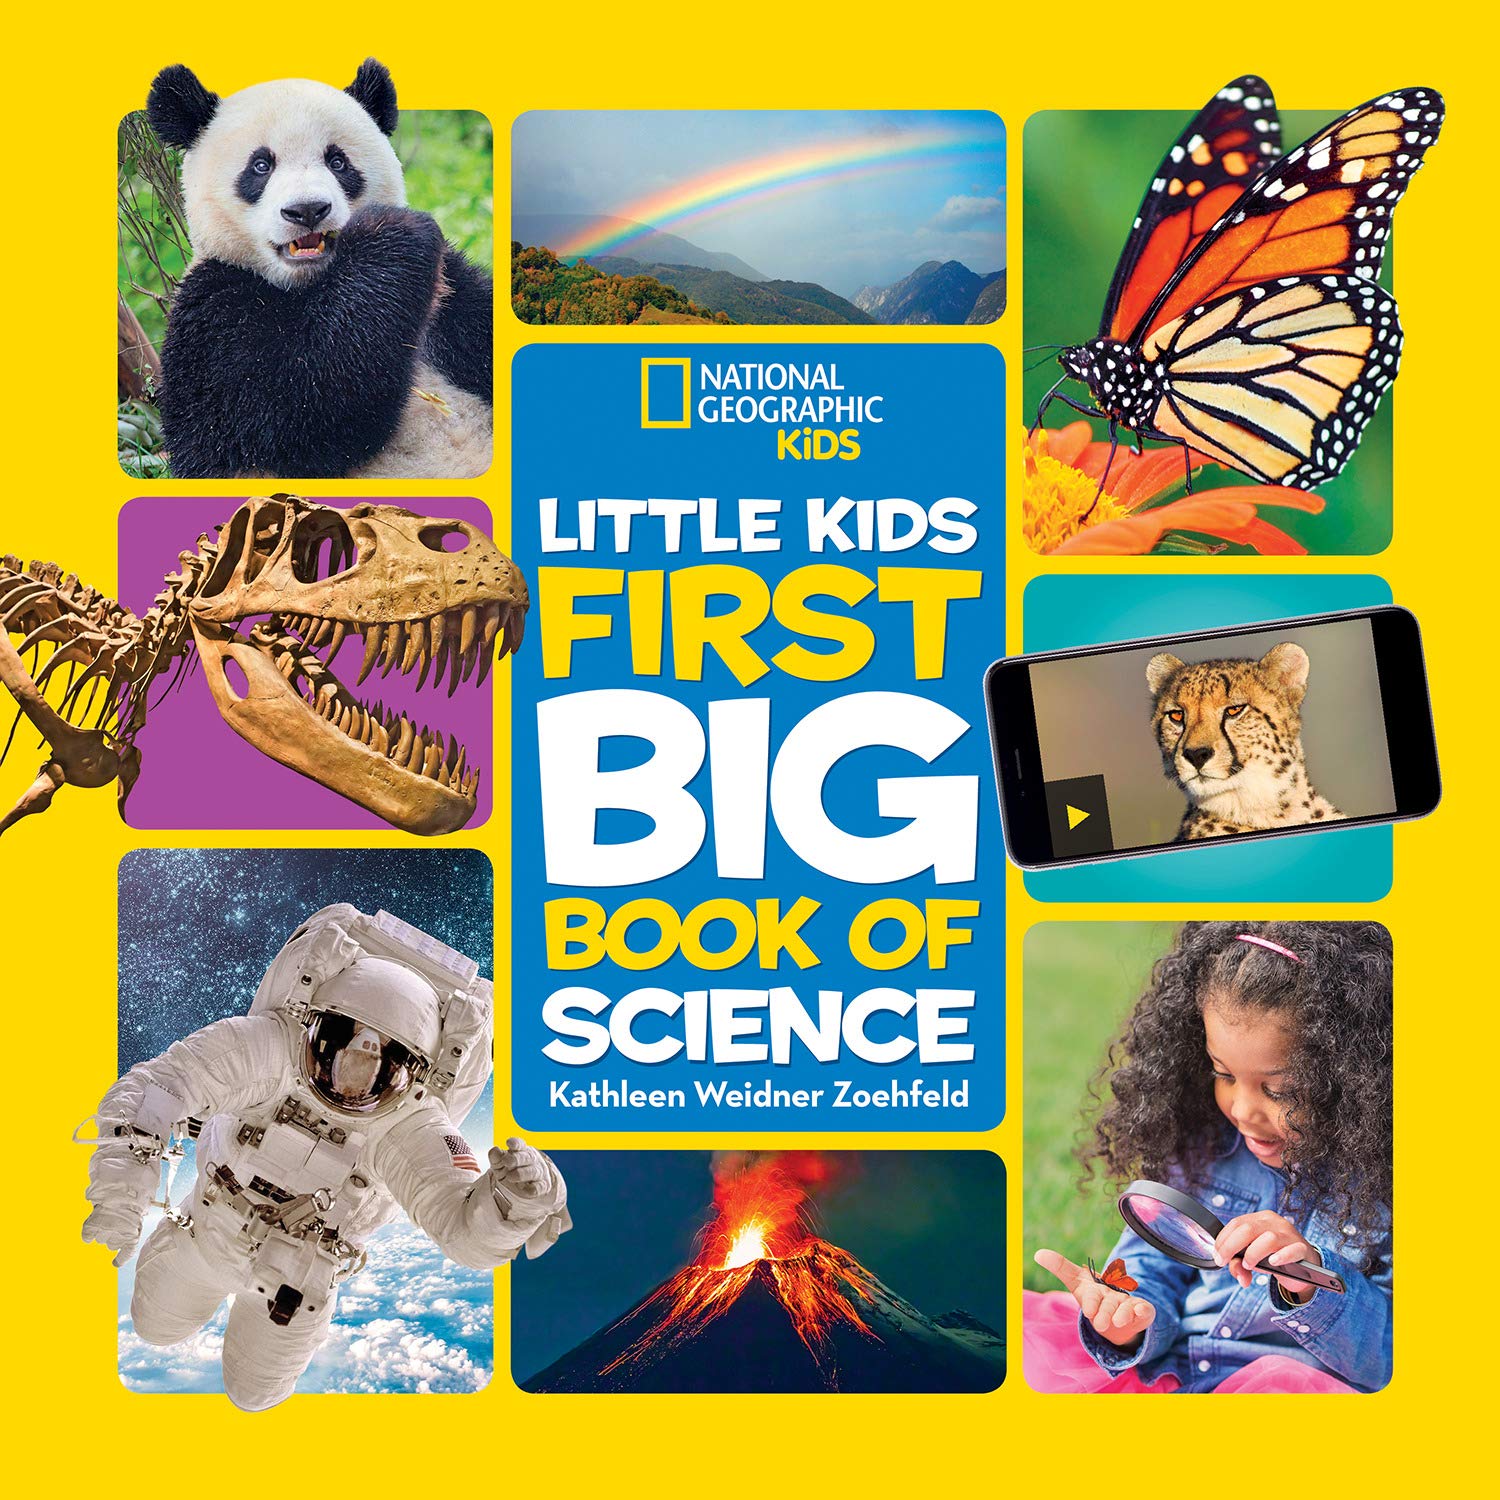 Little Kids First Big Book of Science ( National Geographic Kids )